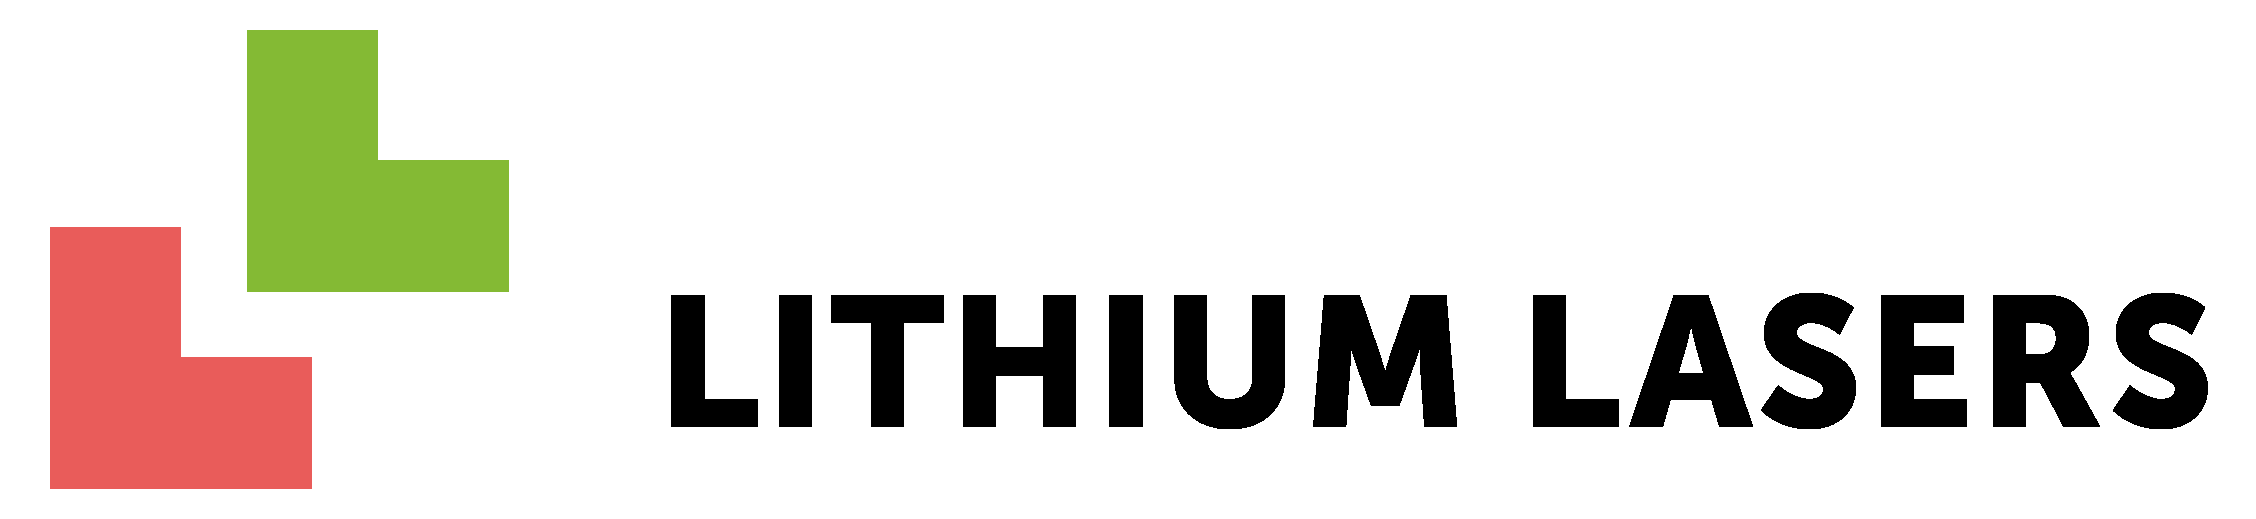 LithiumSix1050图4